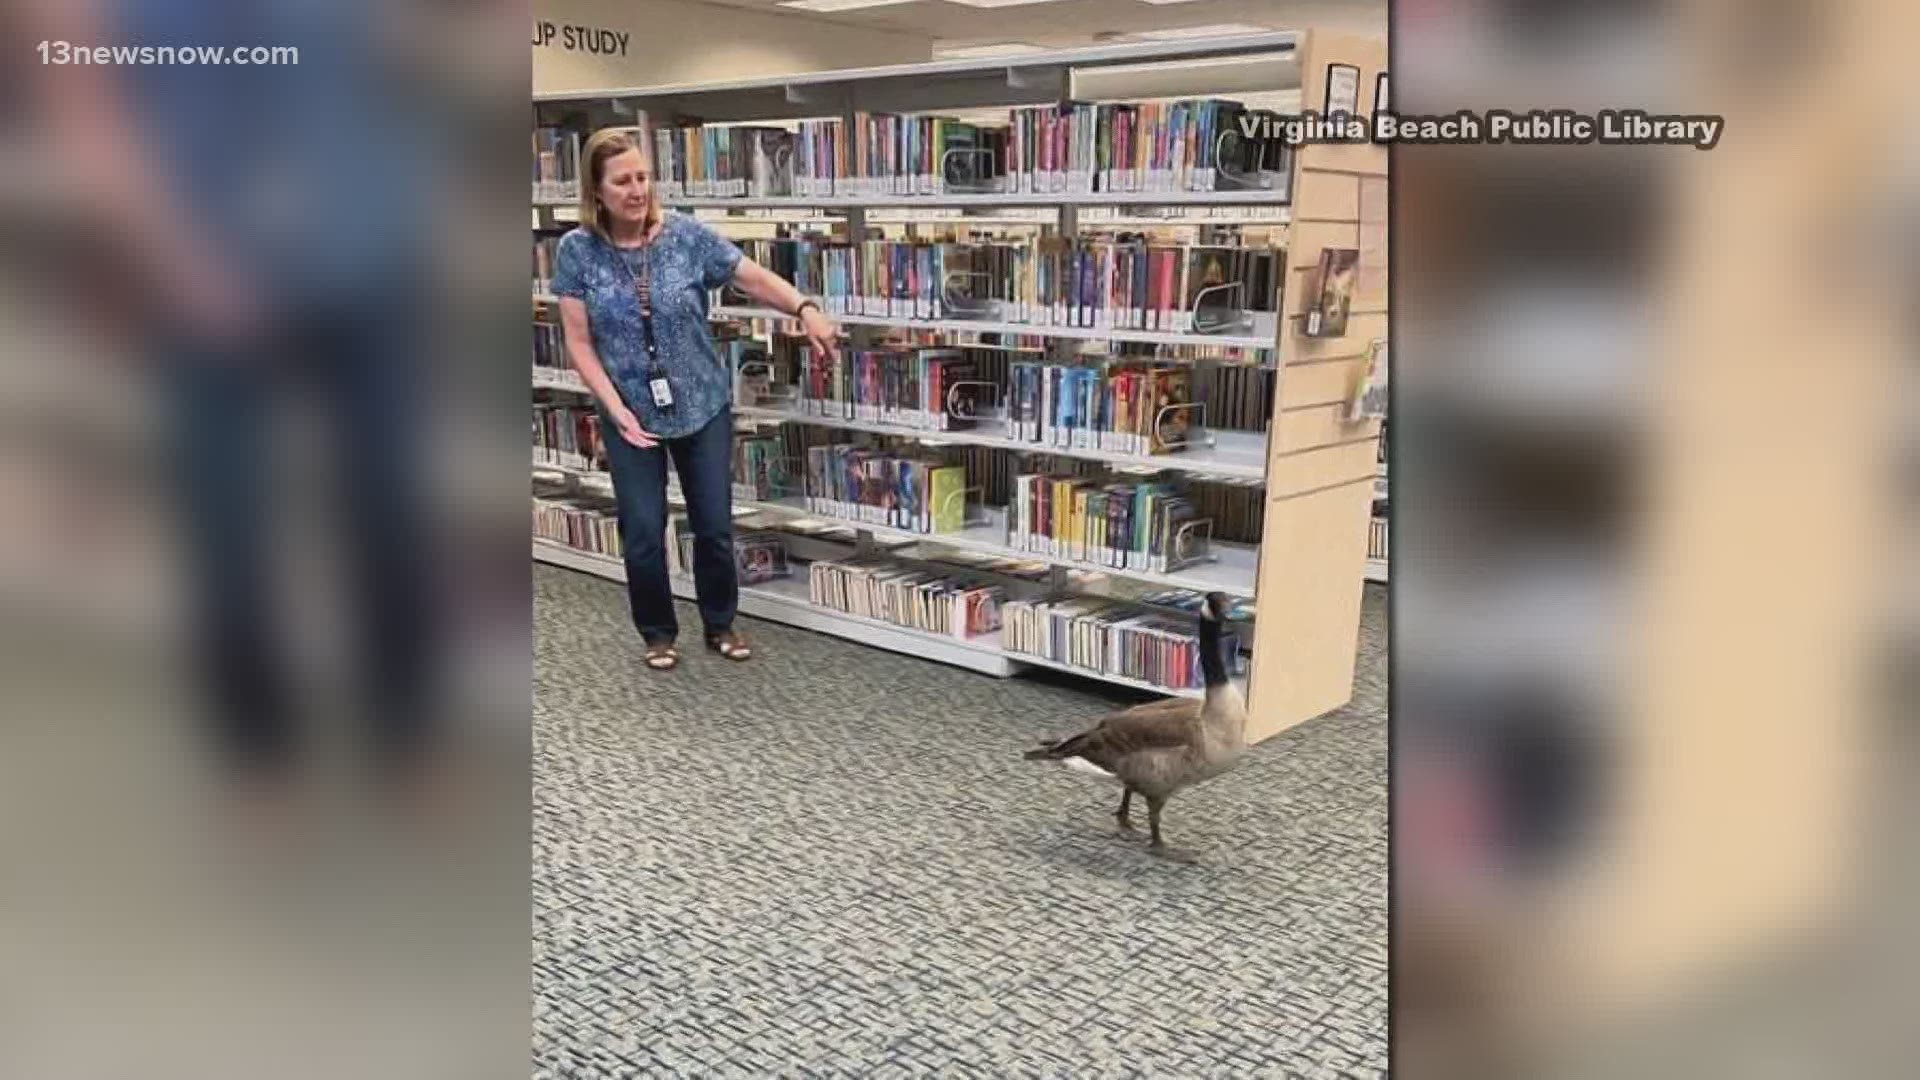 A wounded goose waddled through a Virginia Beach library, surprising the librarians and guests.